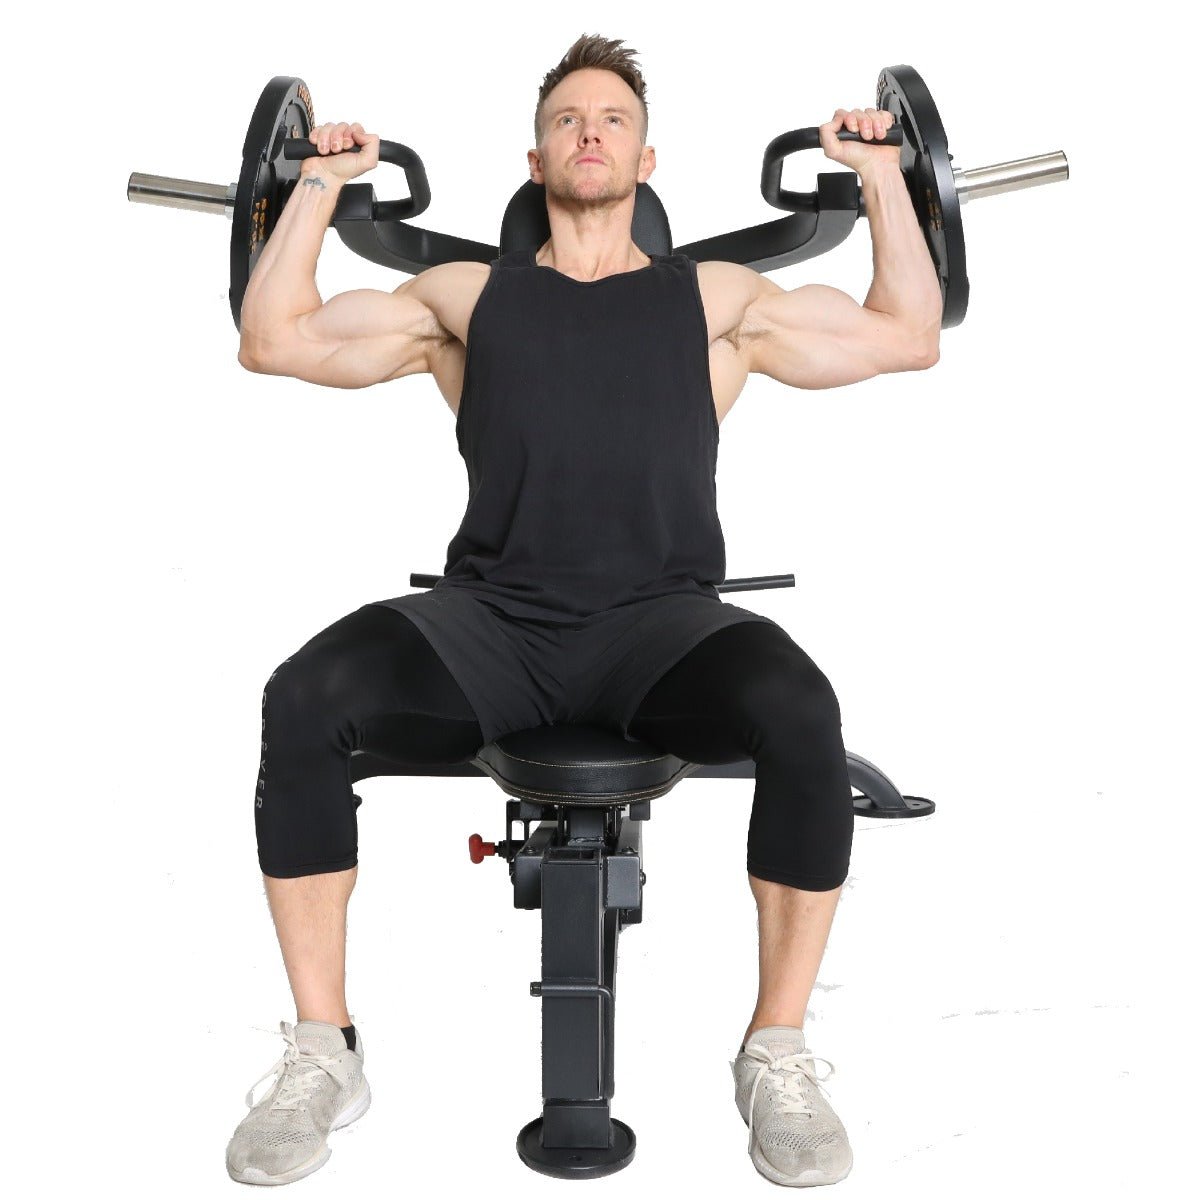 Rob Riches performing a seated shoulder press exercise.